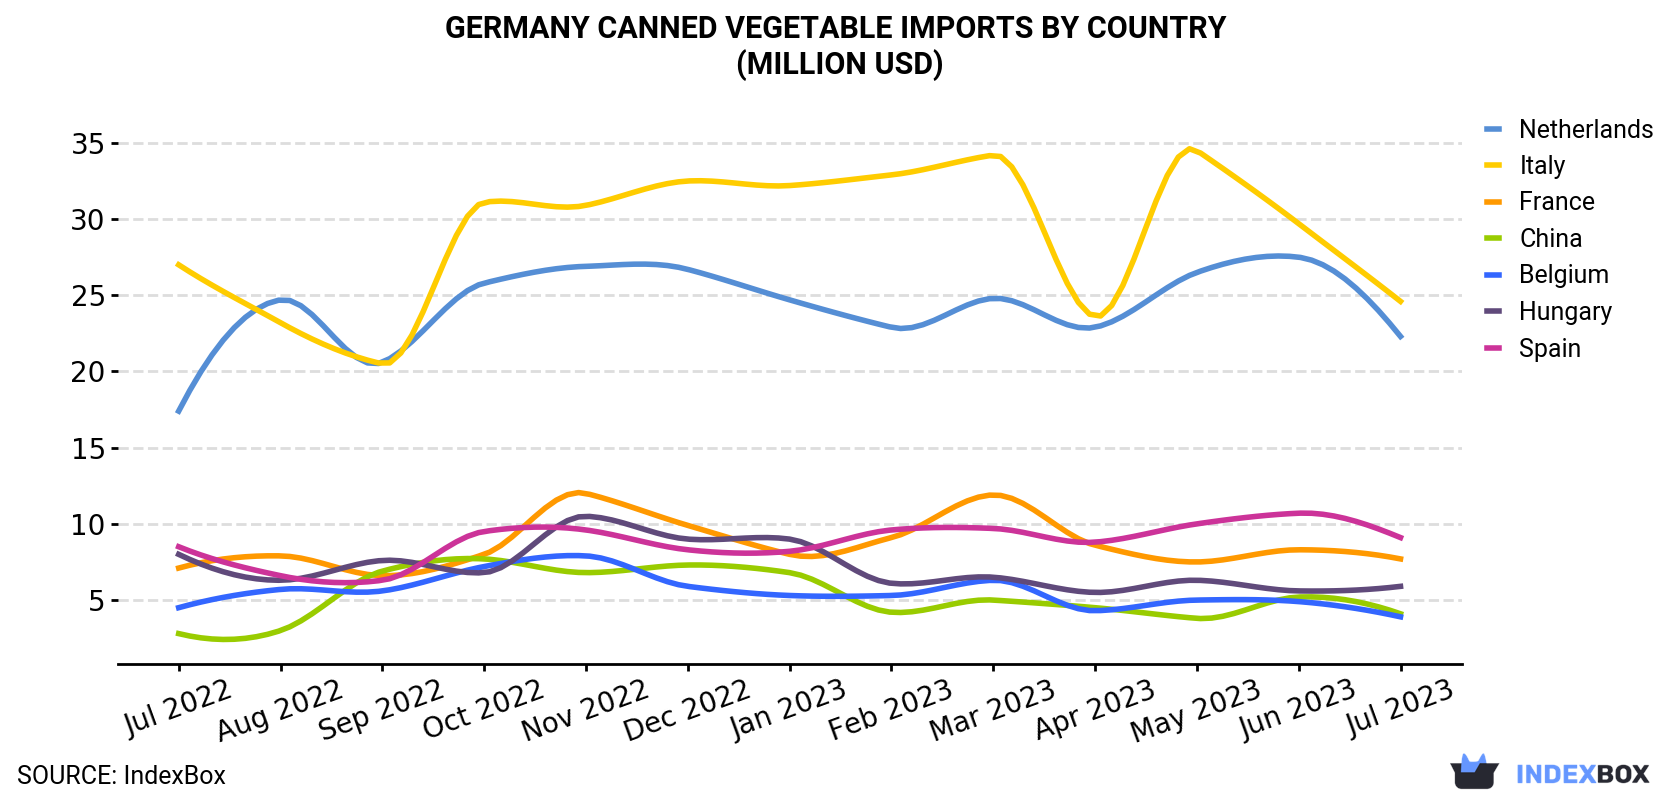 Germany Canned Vegetable Imports By Country (Million USD)